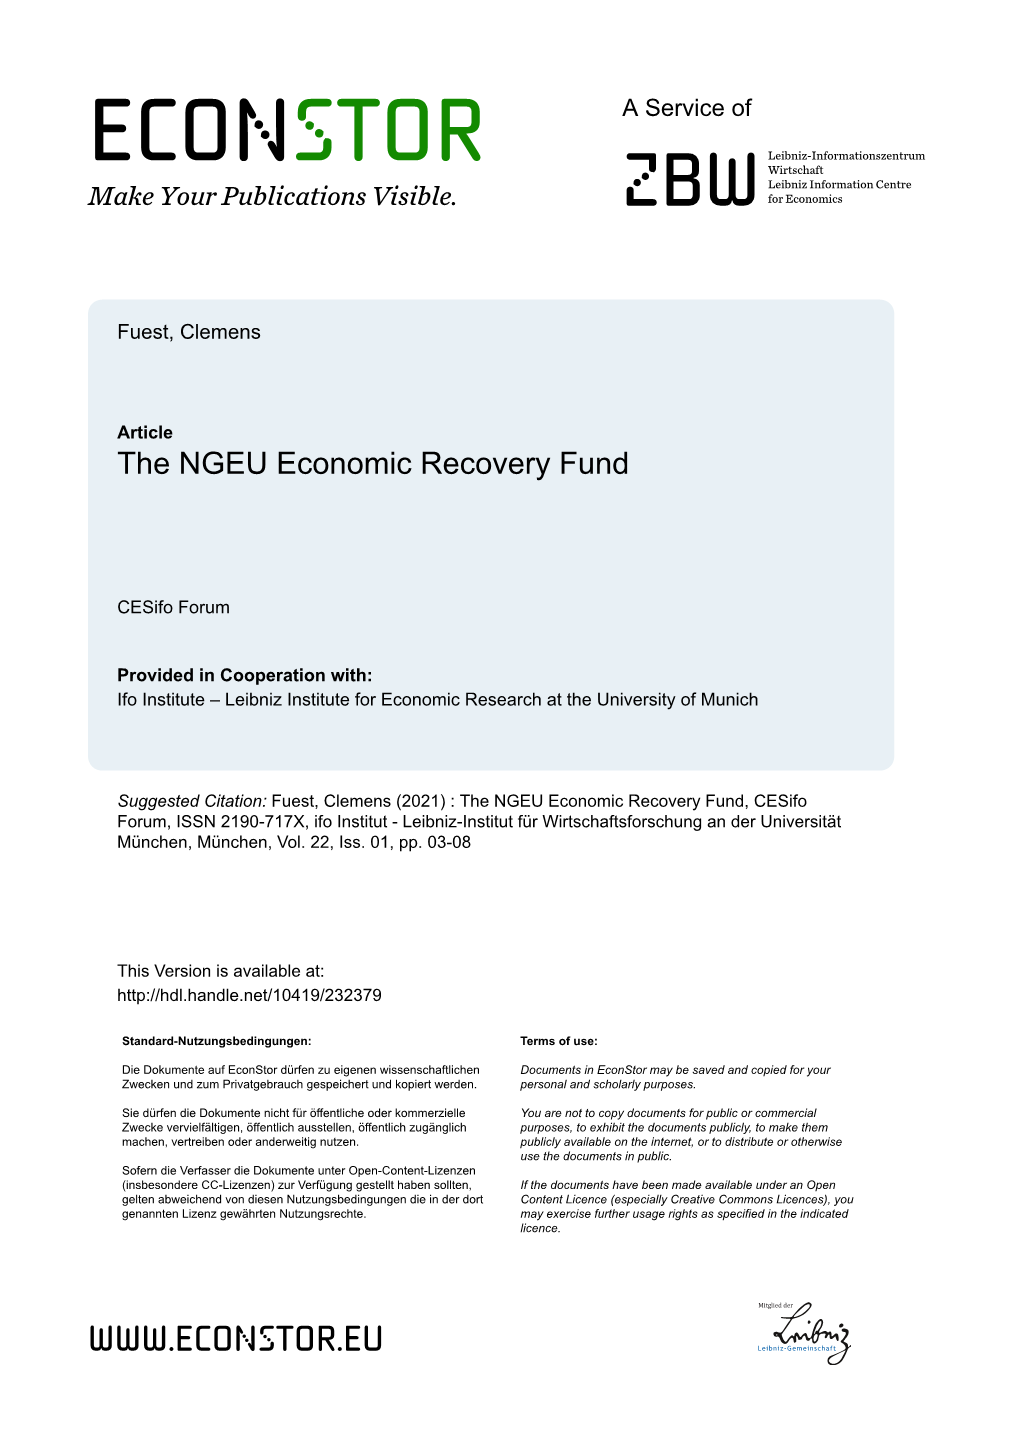 The NGEU Economic Recovery Fund